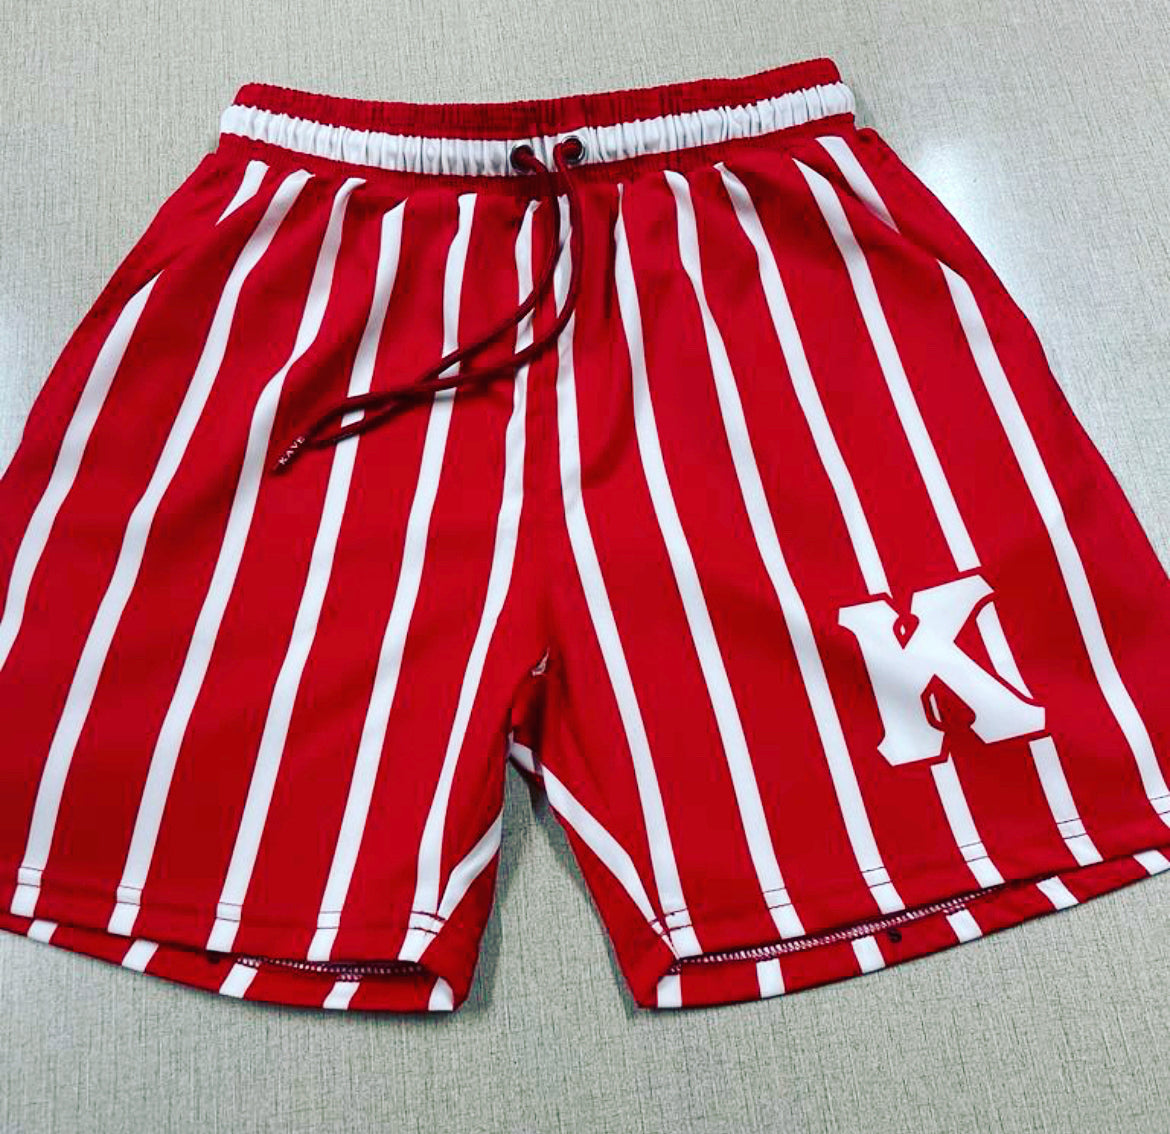 Crafted with high-quality materials, these swim shorts offer durability and long-lasting wear. Ideal for anyone who wants to make a statement while enjoying the sun, these Kappa Alpha Psi swim shorts are the perfect choice.